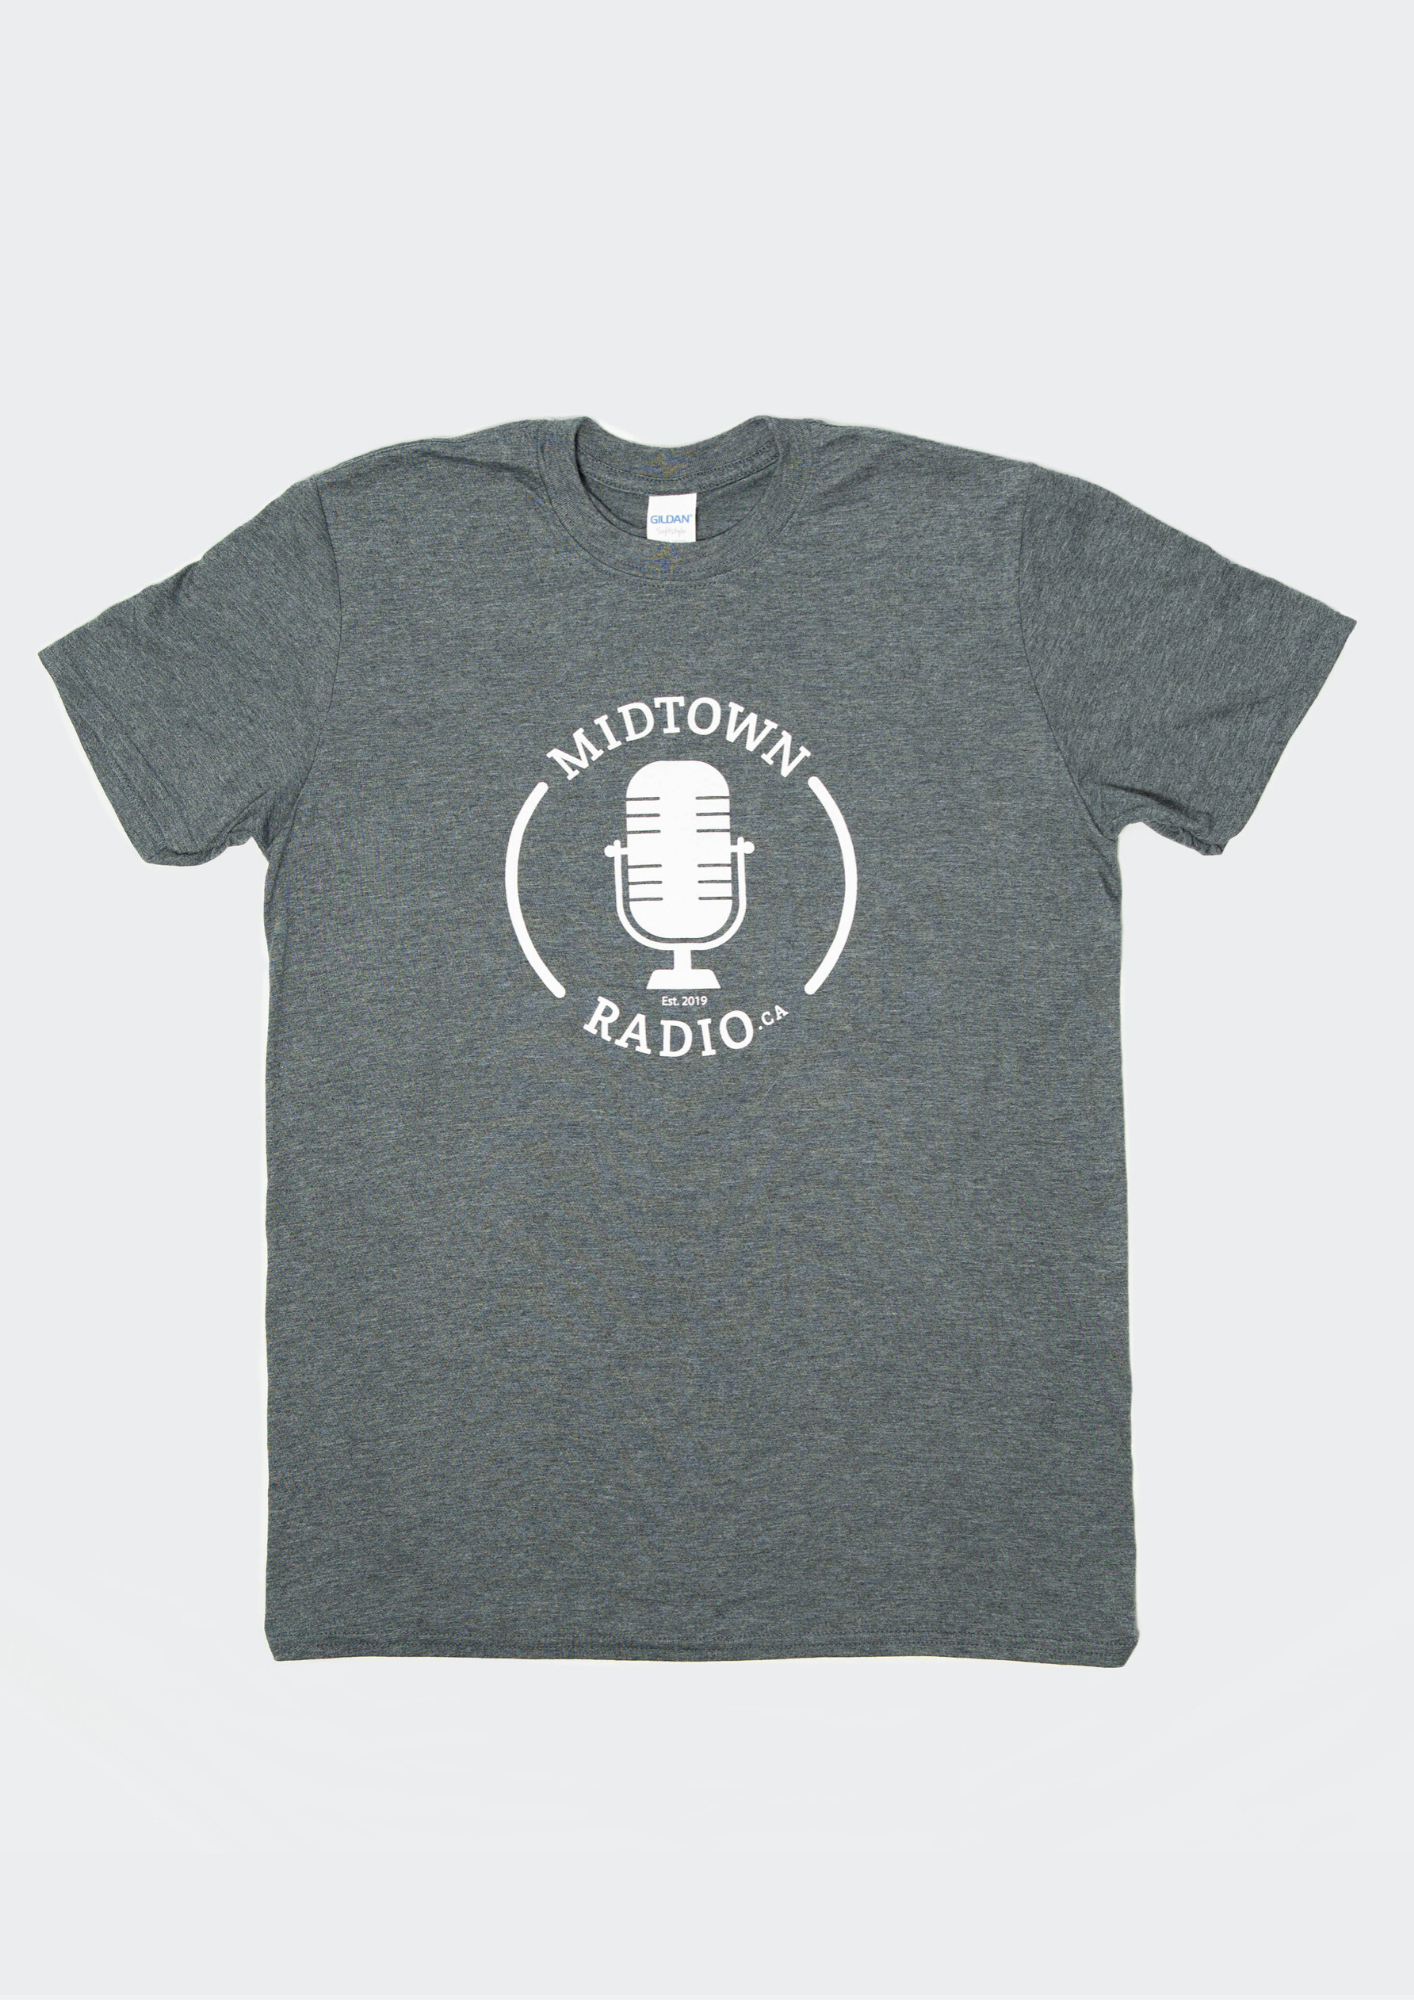 grey logo t-shirt with 'midtown radio' text with white graphic microphone